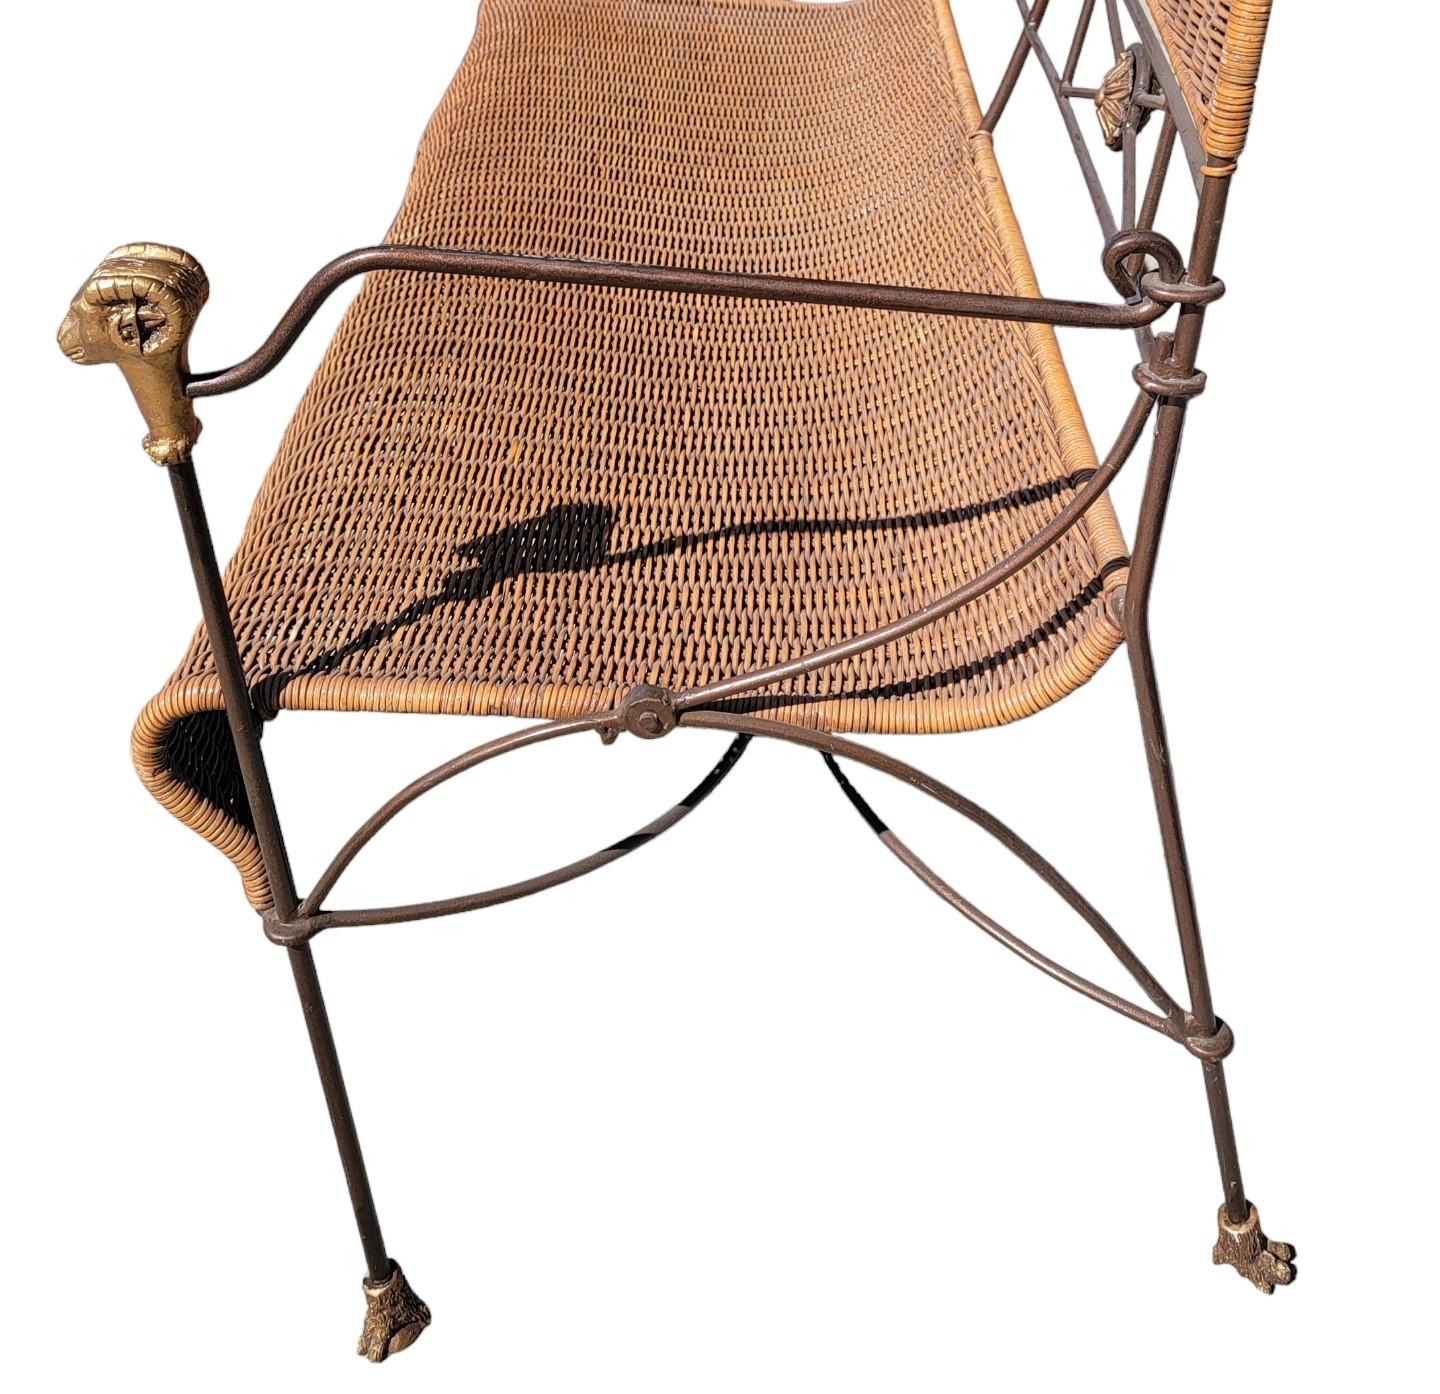 Modern Set of Three Iron And Wicker Settee And Chair By Giacometti 